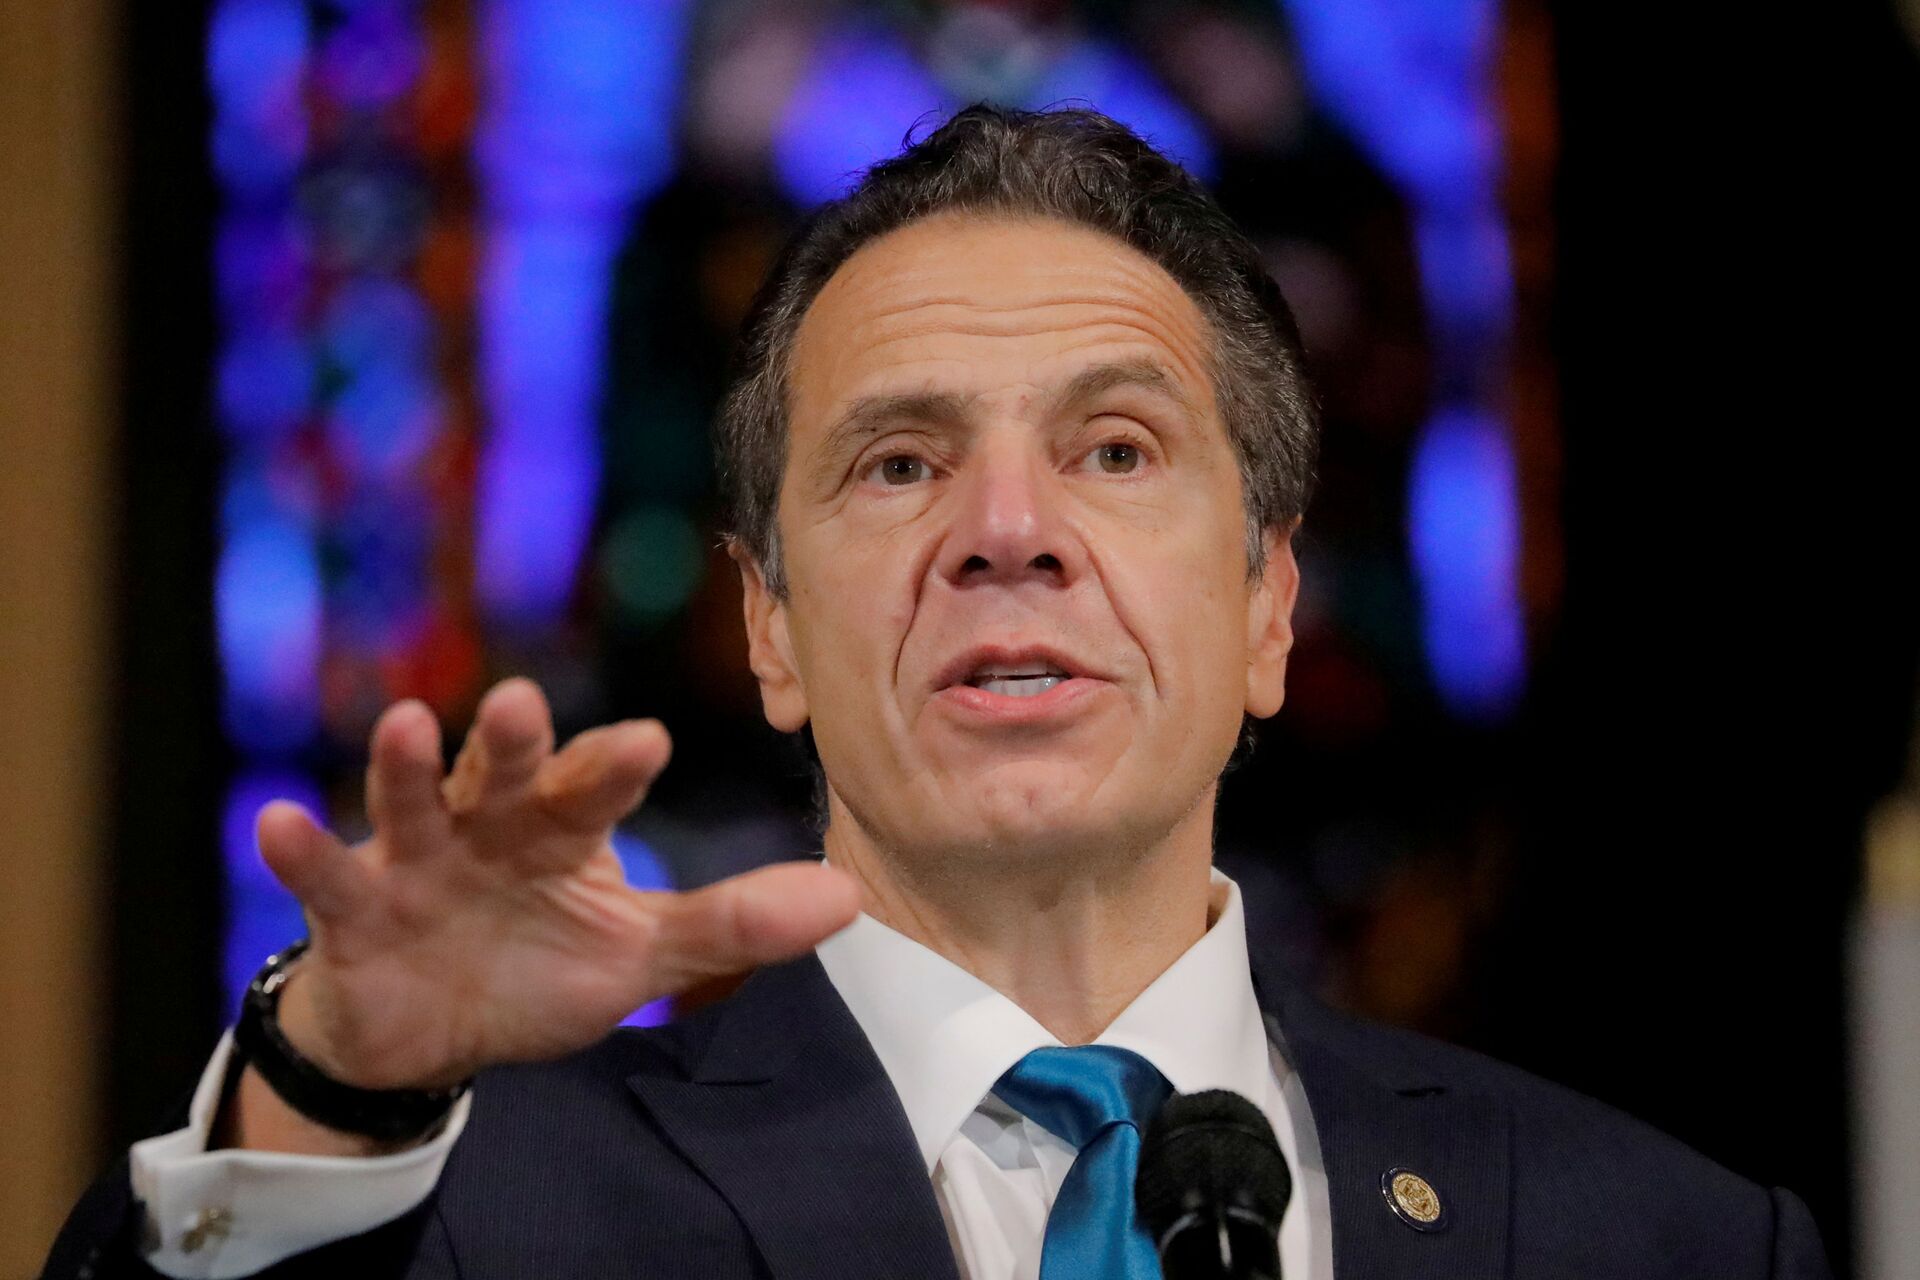 Another Former Aide Accuses Andrew Cuomo of Sexual Harassment - Sputnik International, 1920, 28.02.2021